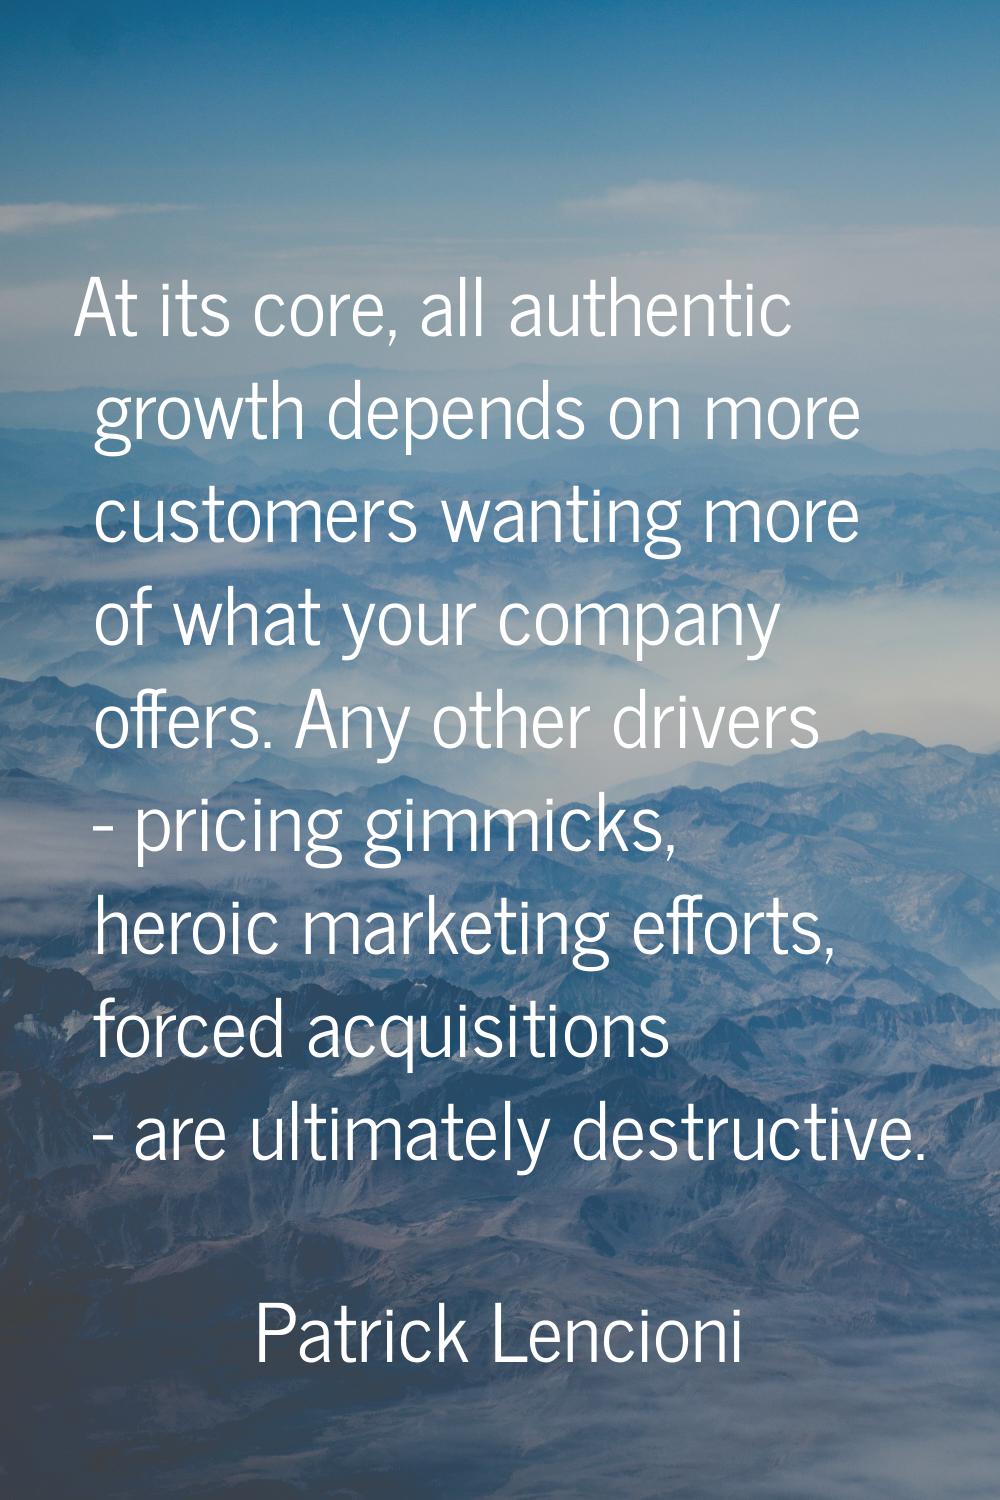 At its core, all authentic growth depends on more customers wanting more of what your company offer